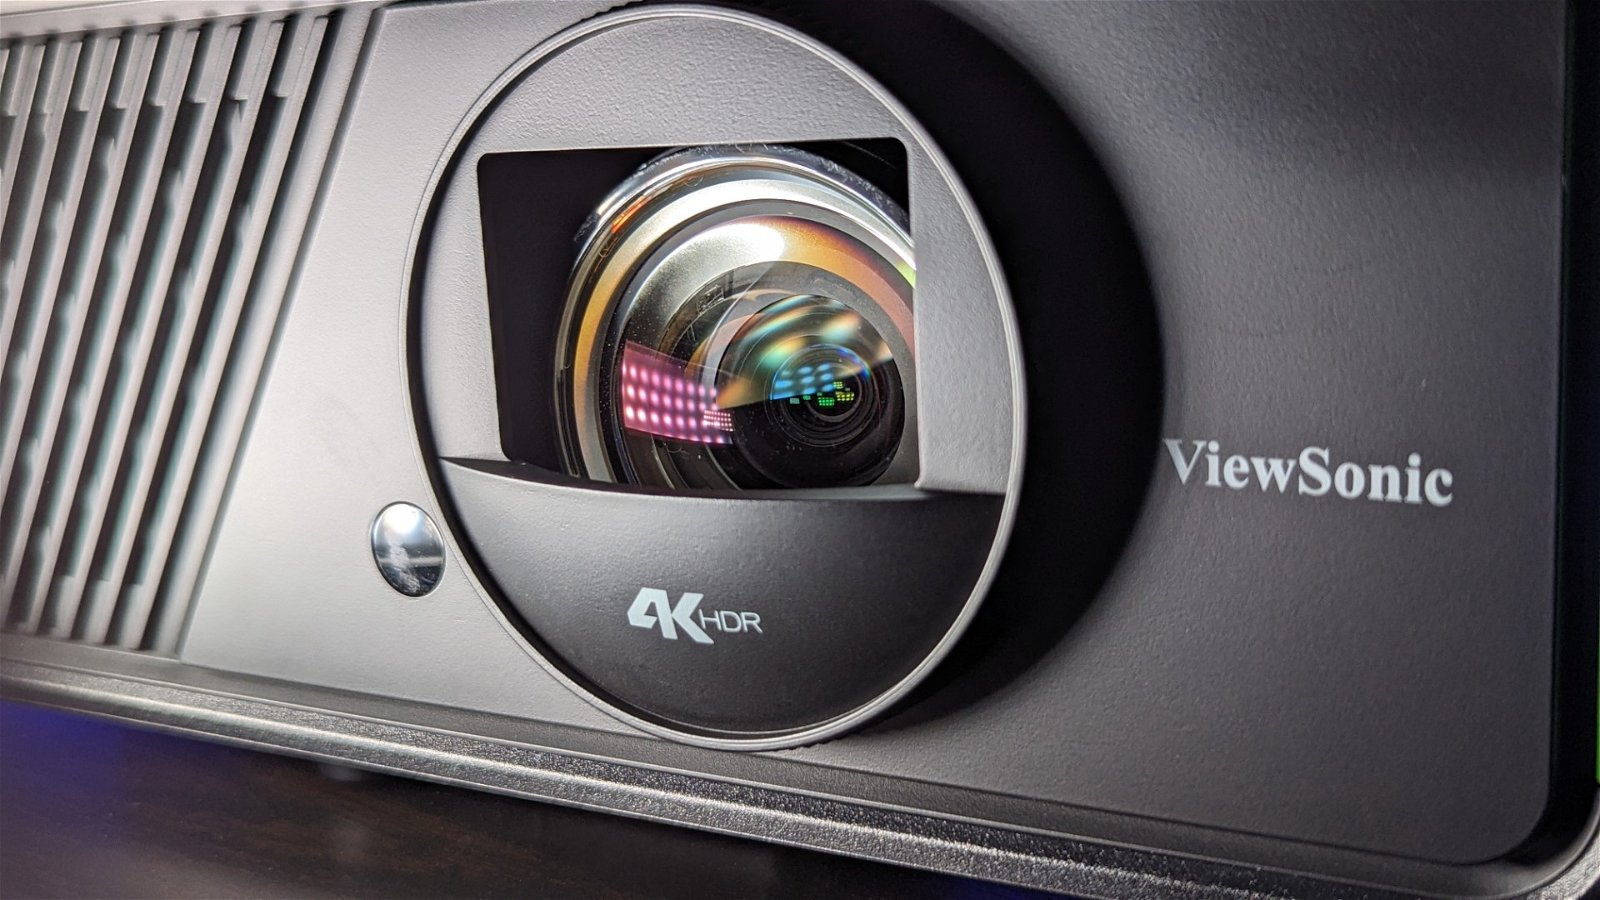 Viewsonic X2-4K Led Smart Projector Review